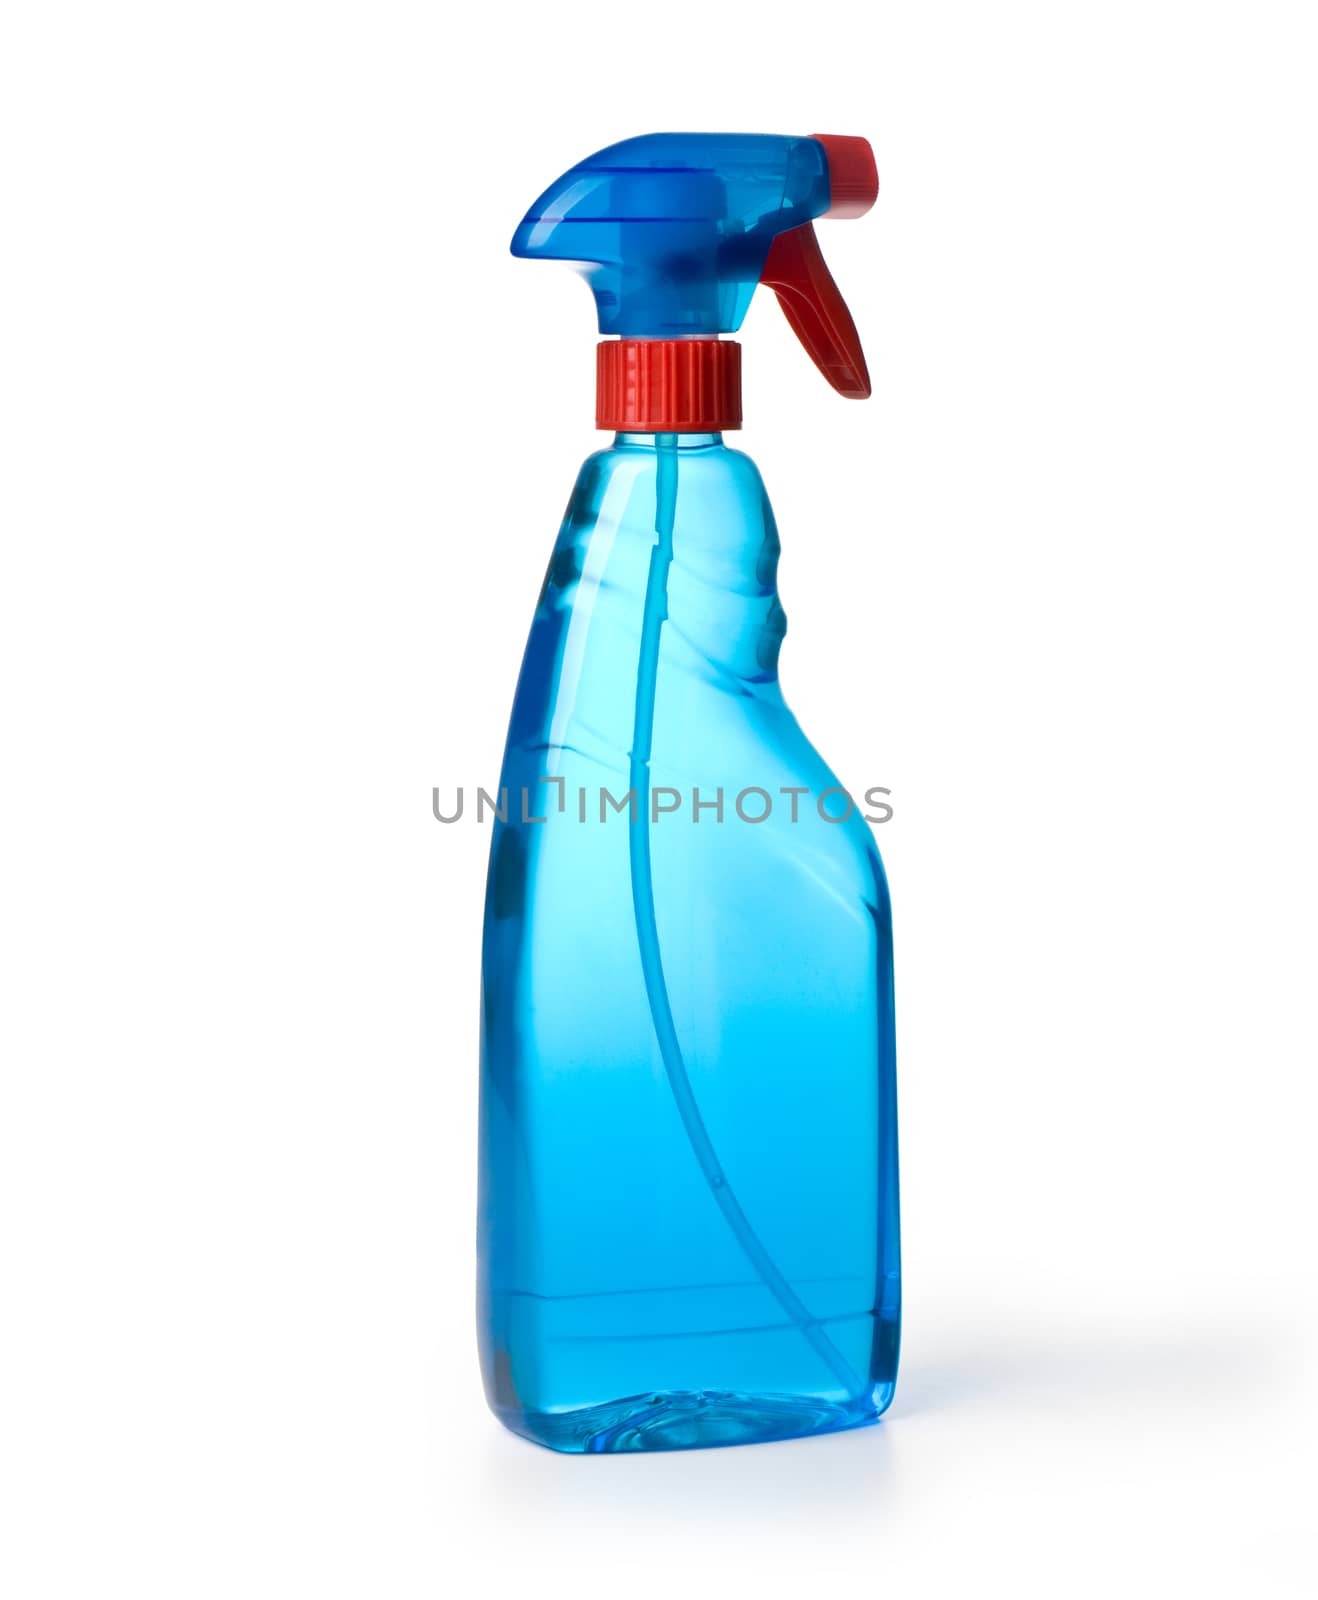 Blue window cleaning solution in a plastic container isolated on white with clipping path